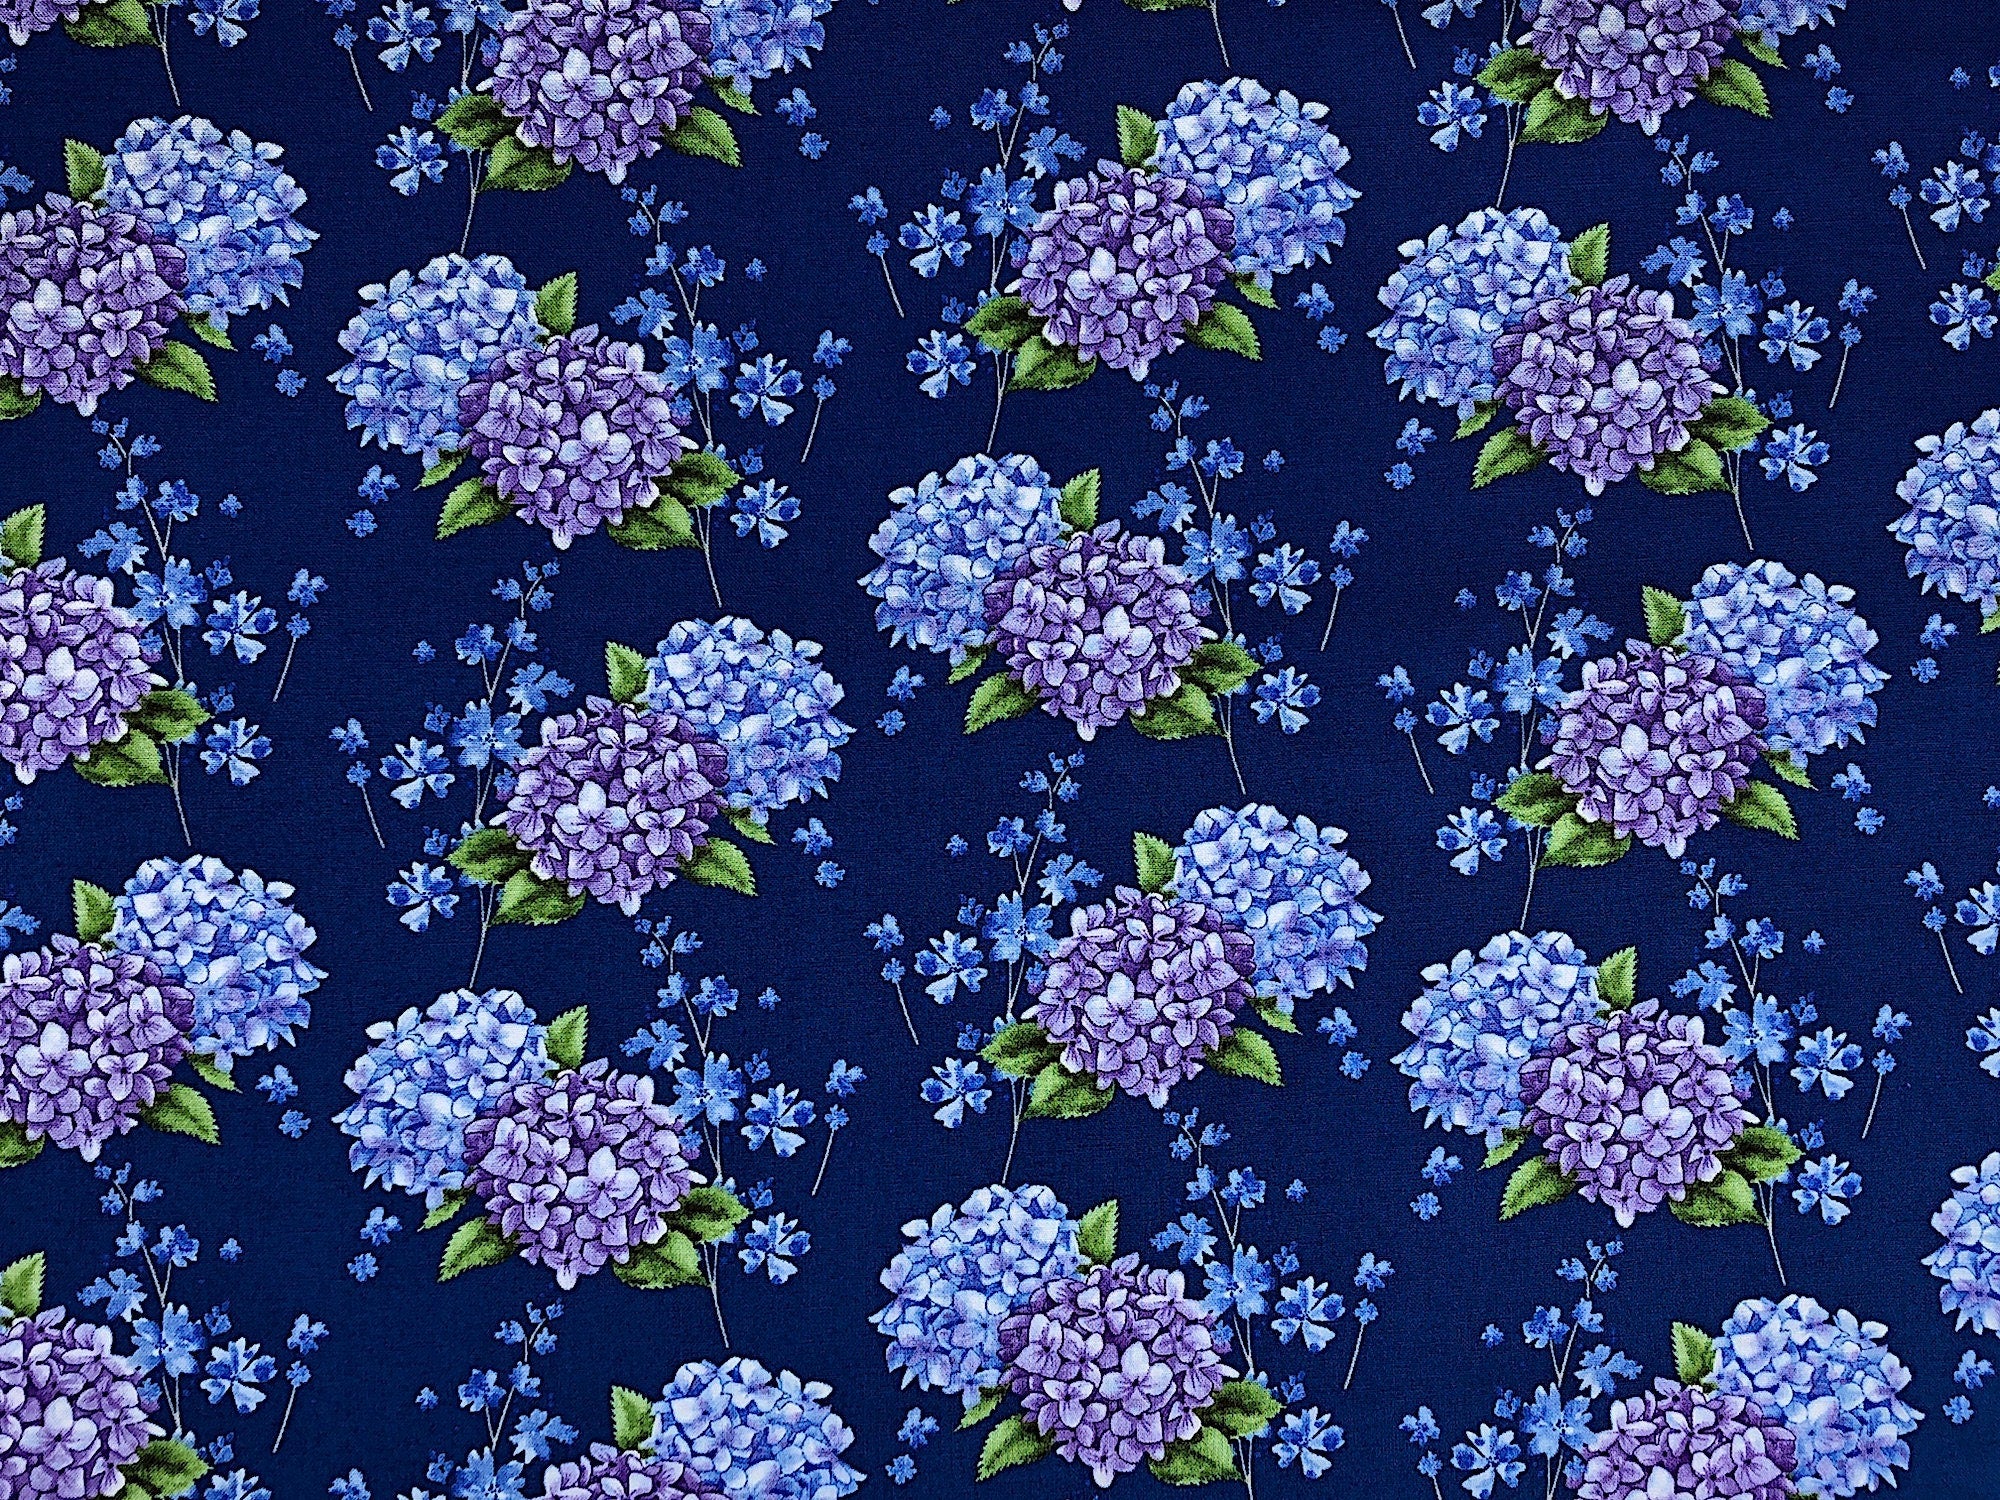 Blue cotton fabric covered with blue and purply hydrangeas.